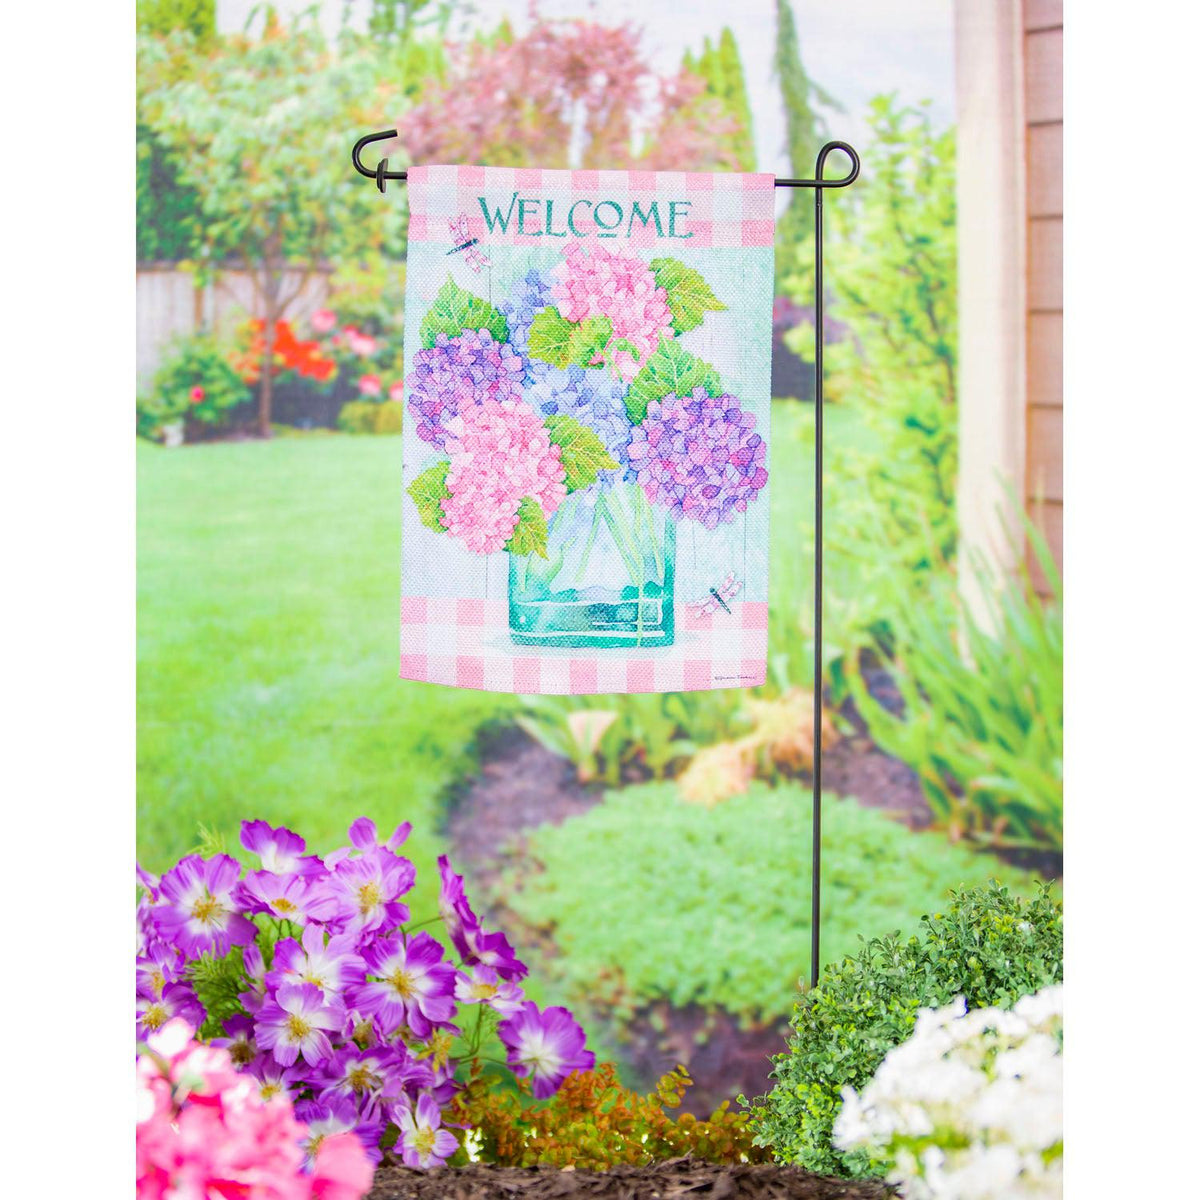 The Welcome Hydrangeas garden flag features pink, blue, and lavender hydrangeas in a vase, a pink checked top and bottom border, and the word "Welcome "across the top. 